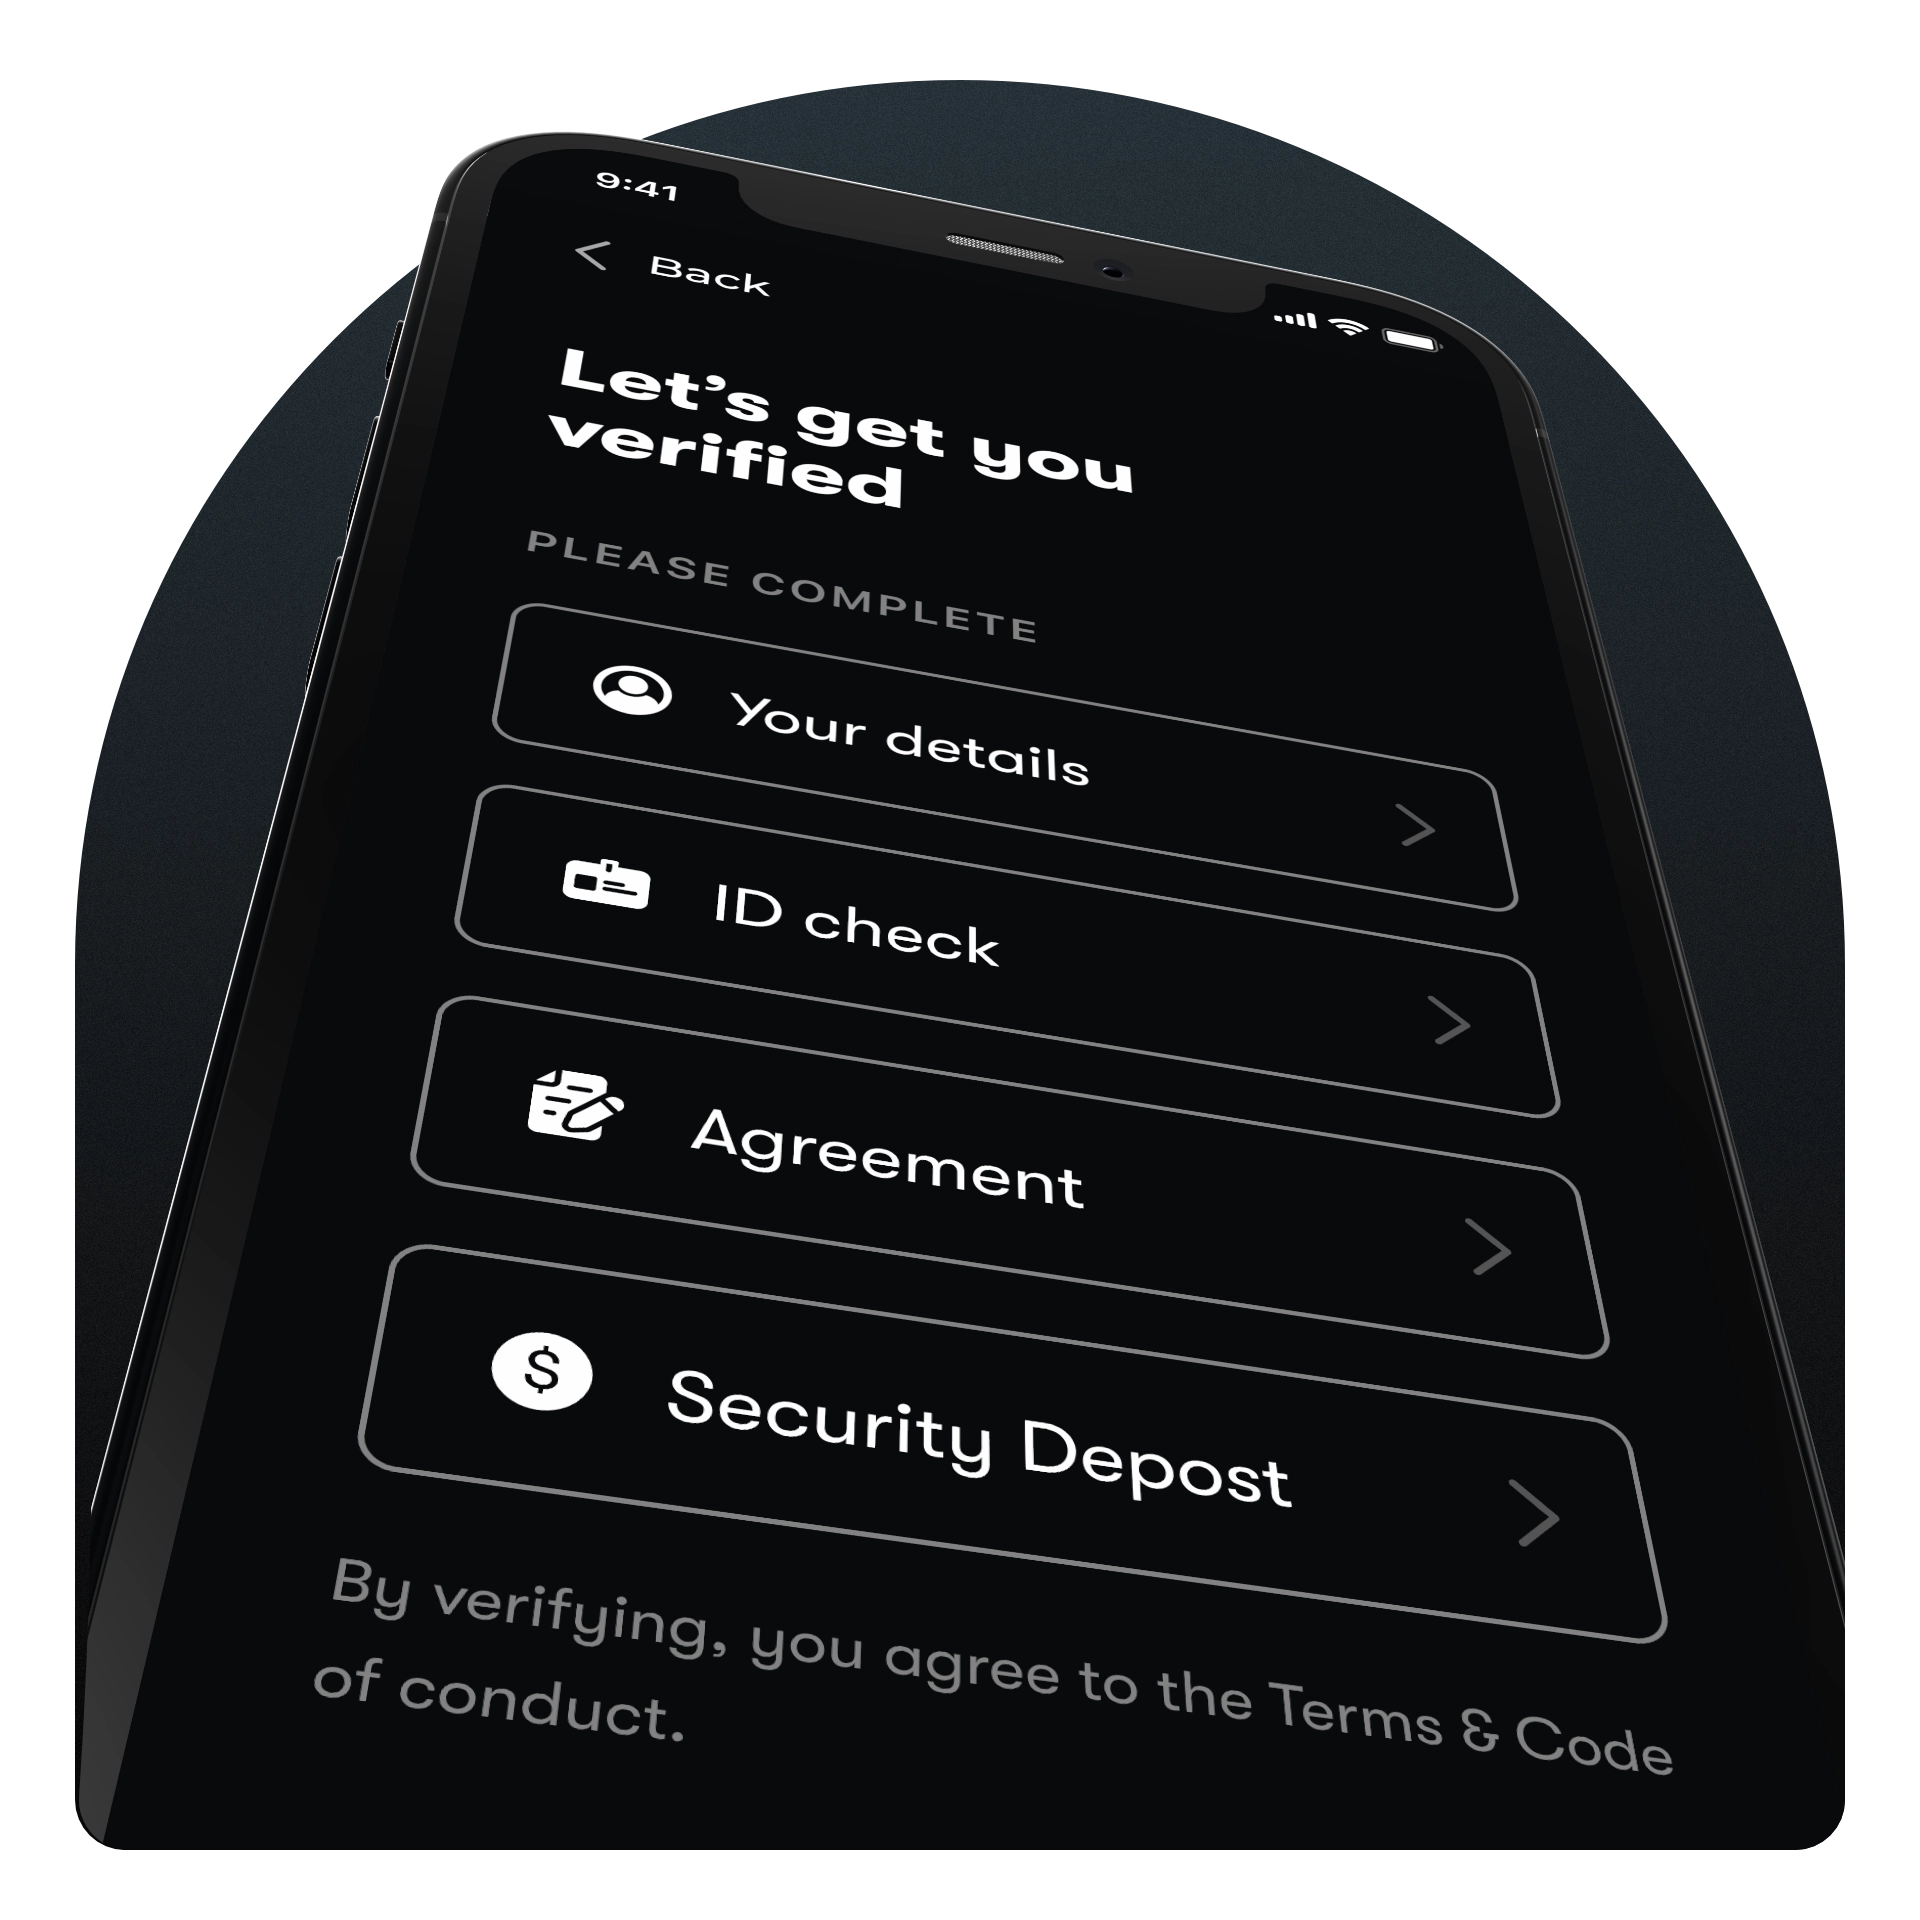 Collecting a security deposit at the verification stage